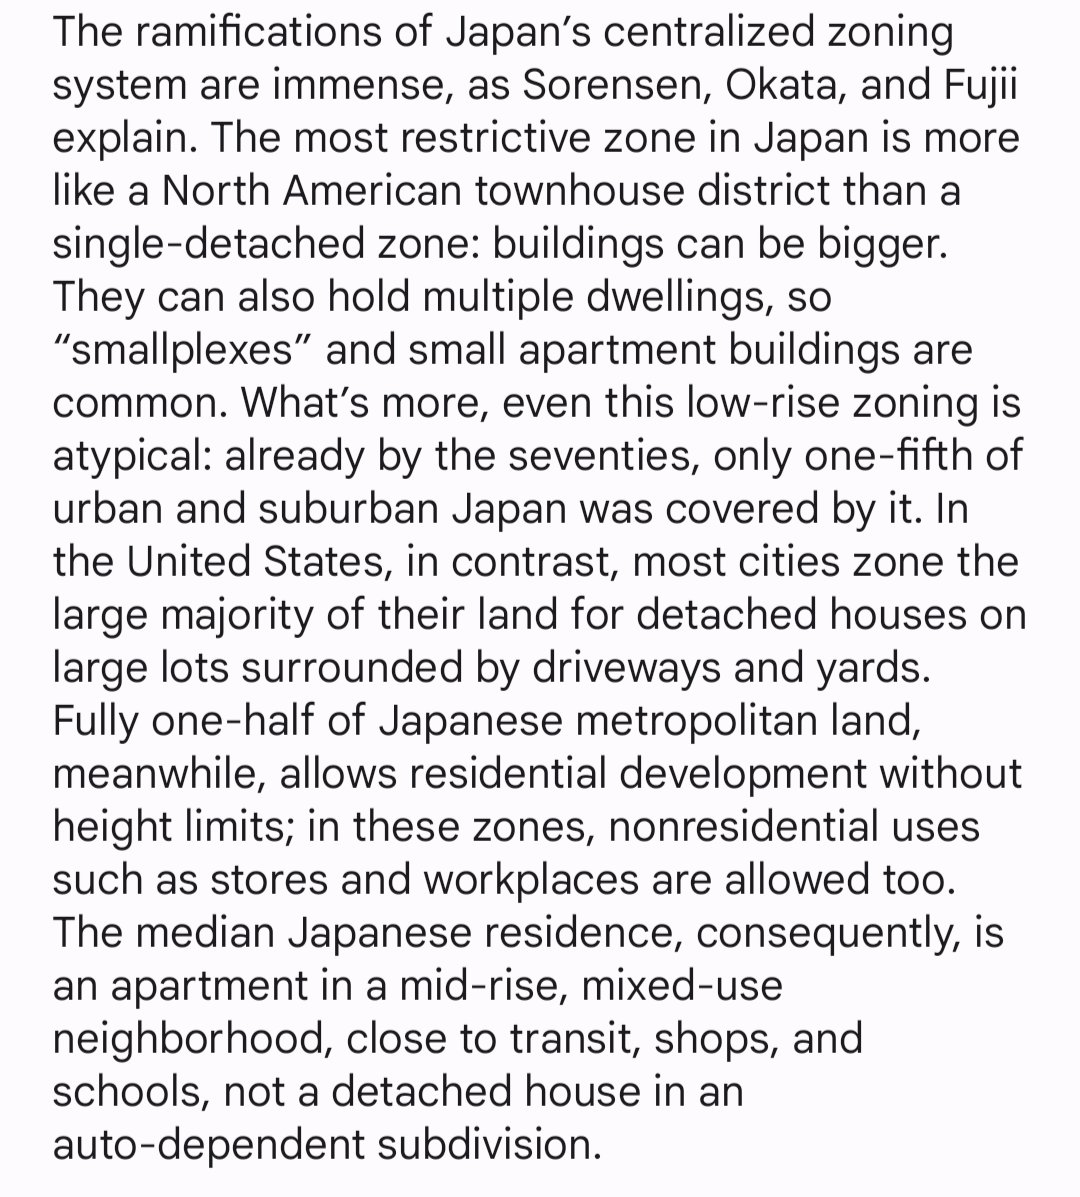 @showusyourwork 1) The average zoning across Japan allows for apartment buildings by default instead of being zoned only for single-family homes.

sightline.org/2021/03/25/yes…